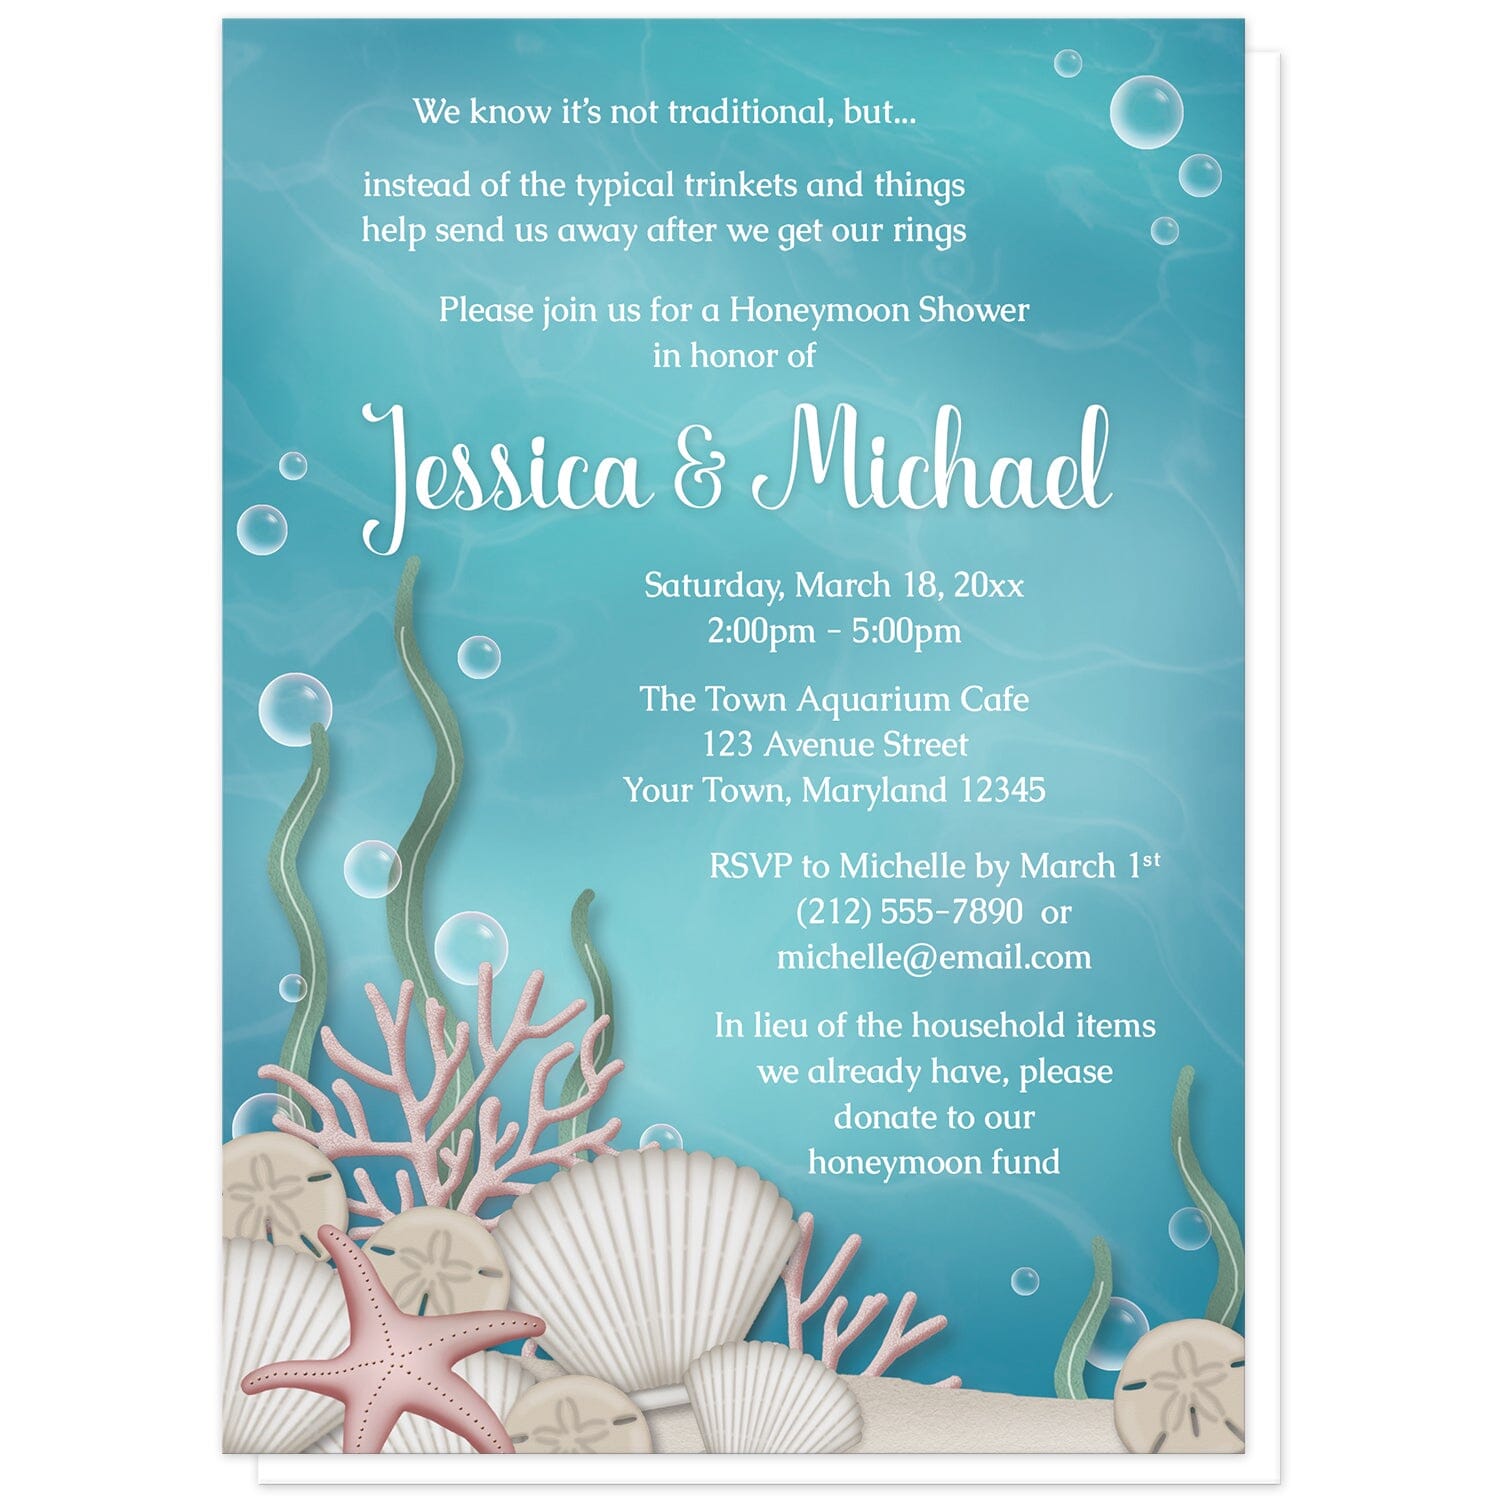 Whimsical Under the Sea Honeymoon Shower Invitations at Artistically Invited. Uniquely illustrated whimsical under the sea honeymoon shower invitations with an under the sea or aquarium theme. They are designed with a sandy seabed, assorted seashells, coral, and kelp over an aqua blue water background sprinkled with some whimsical bubbles. Your personalized honeymoon shower celebration details are custom printed in white over the underwater background.